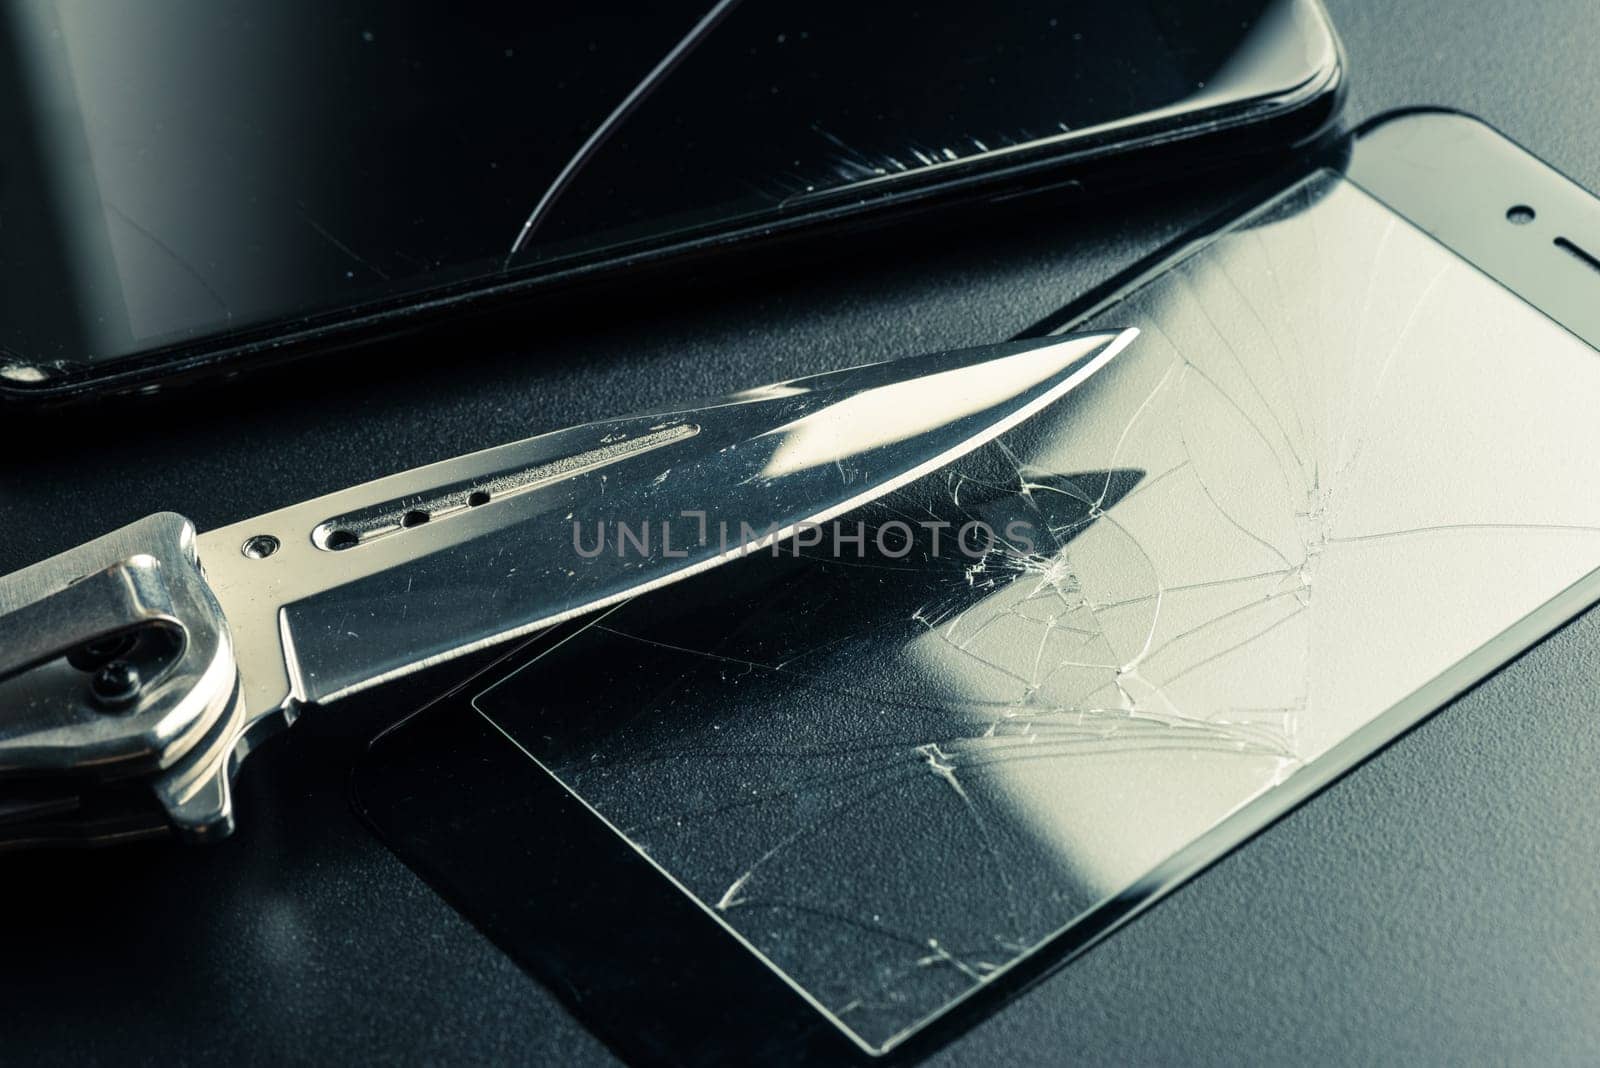 closeup broken tempered glass screen protector for smartphone. Testing the hardeness with knife.